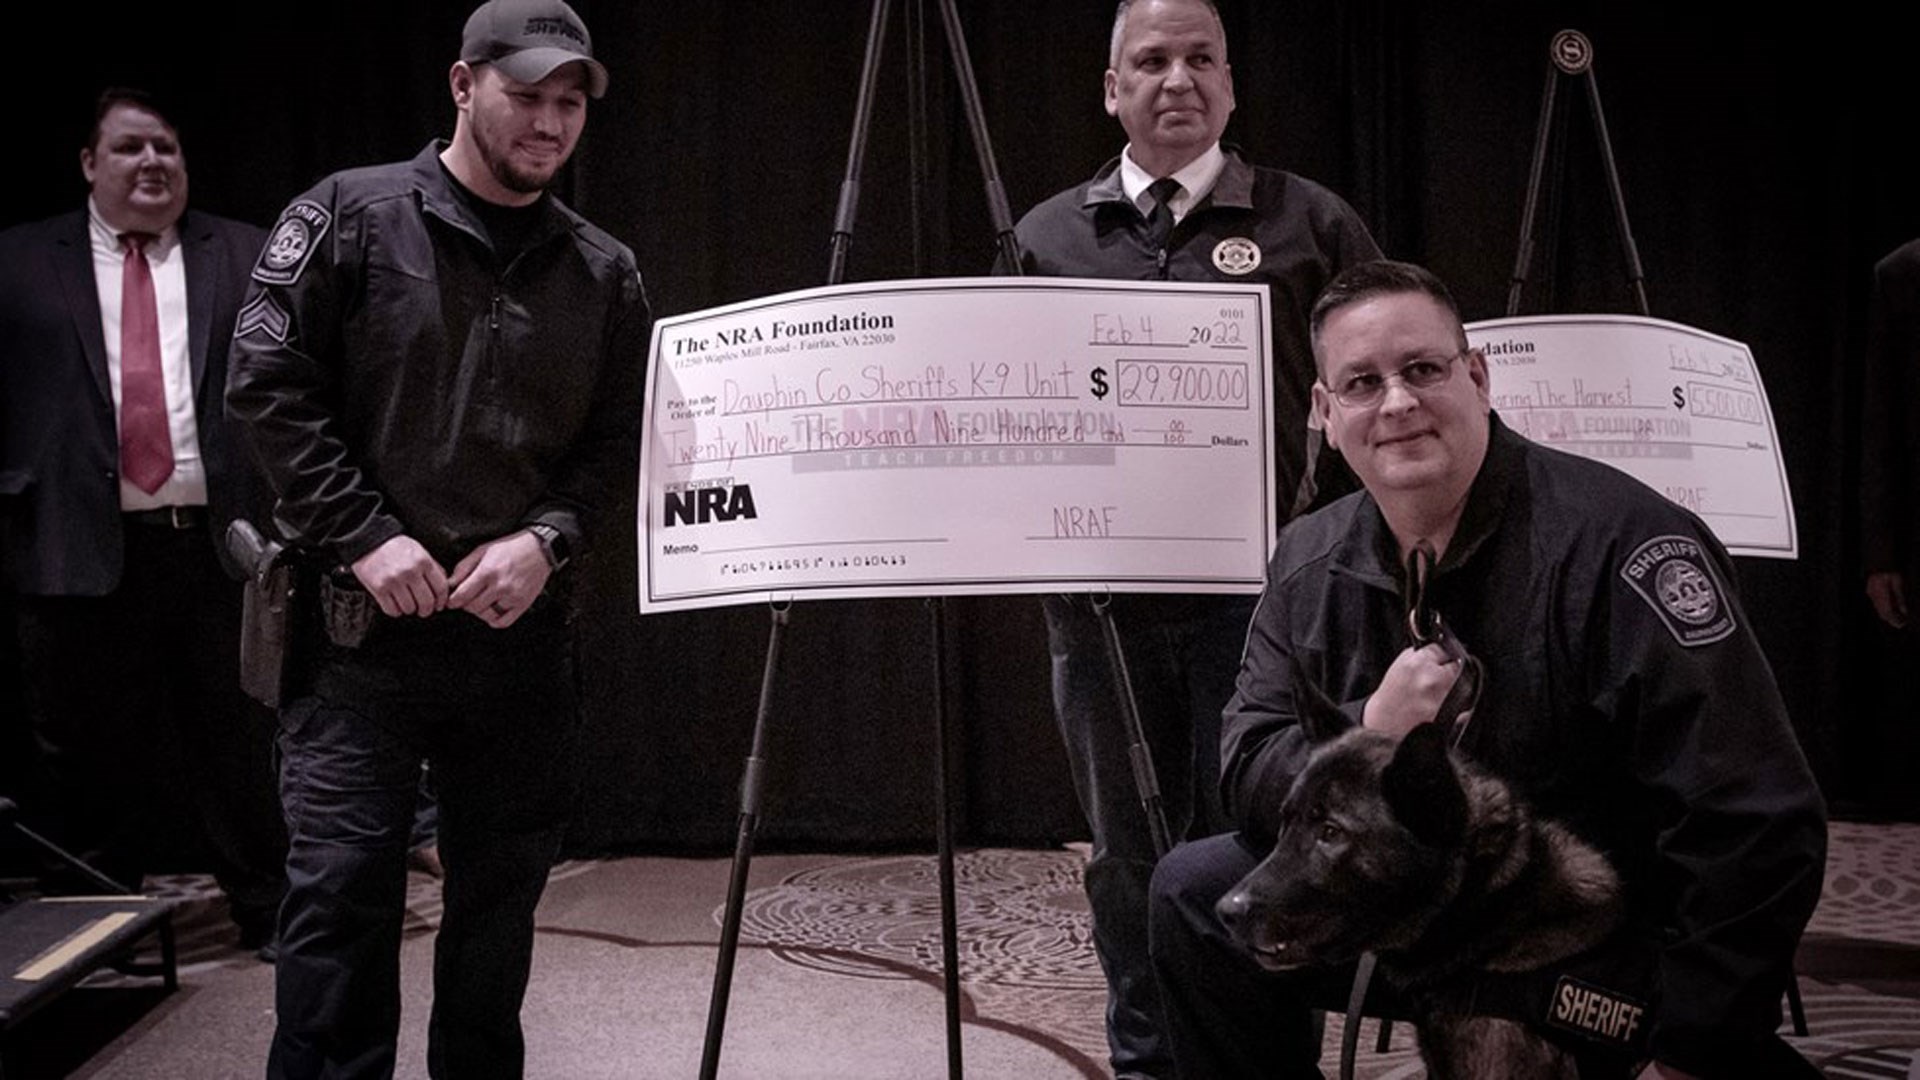 During the ceremony, members of the Dauphin County Sheriff’s Department K-9 Unit were presented a $29,900 grant from the NRA Foundation.